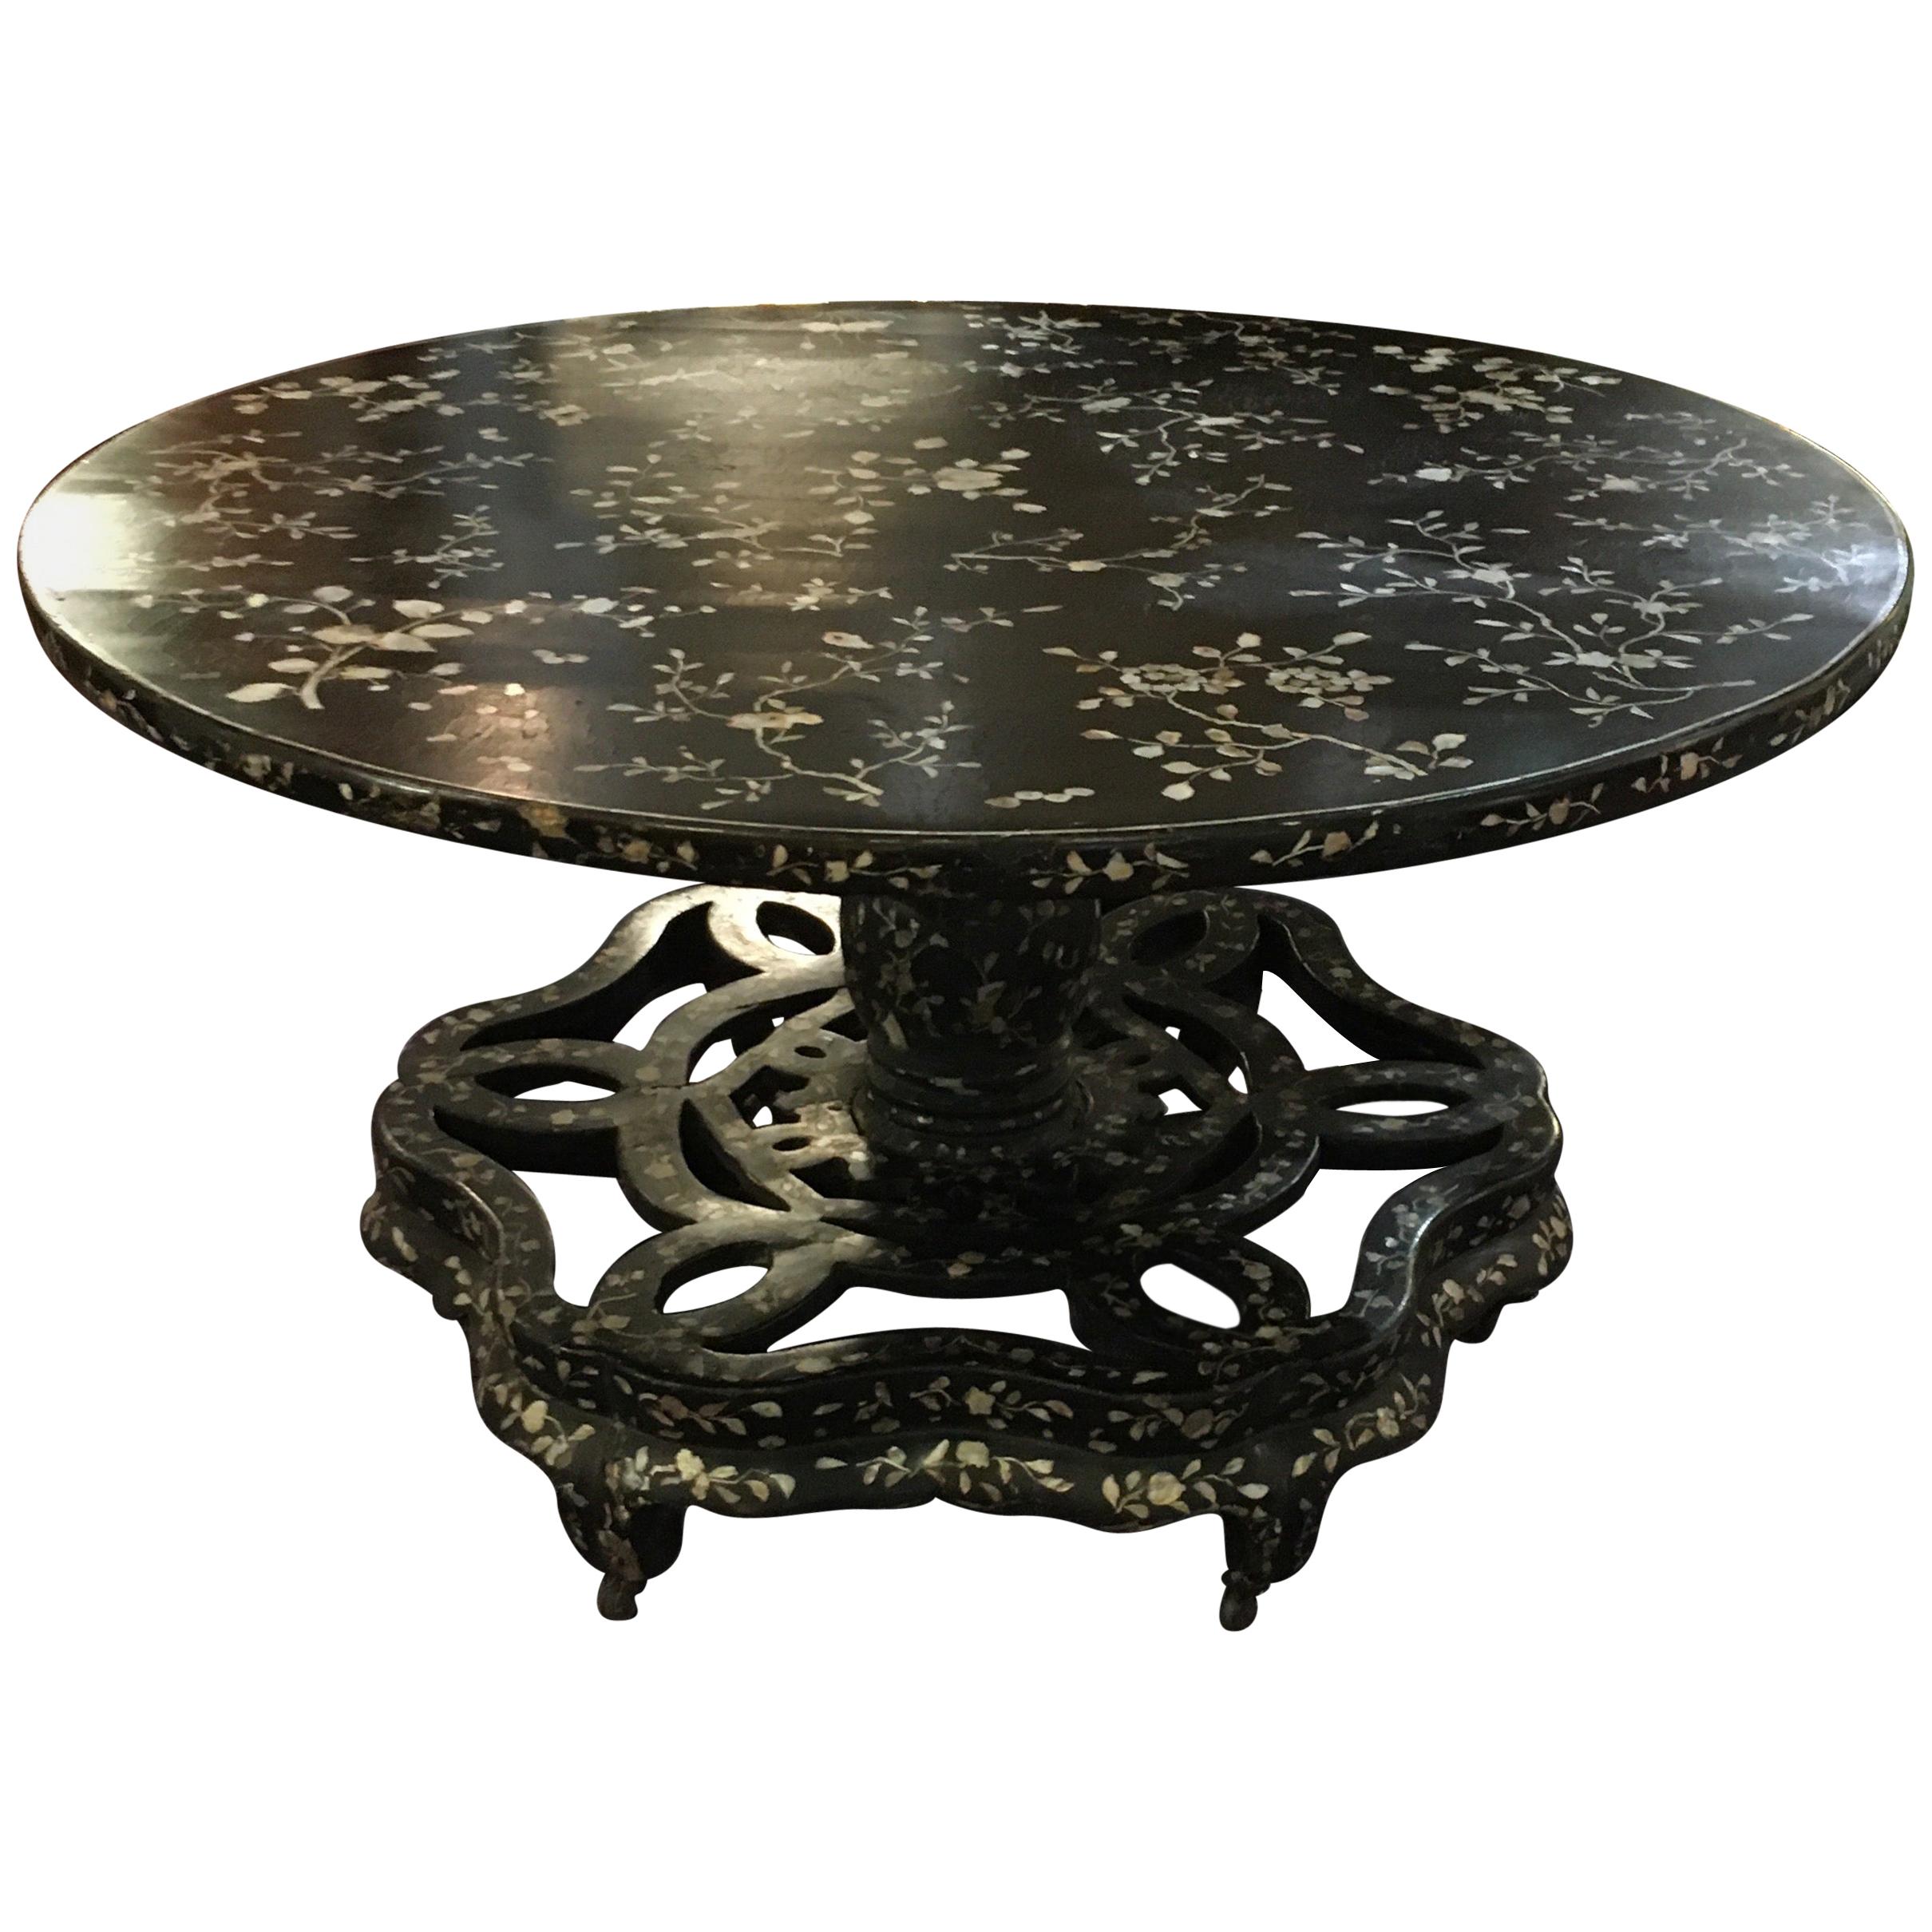 Antique Chinese Laquer and Mother of Pearl Grand Center Table